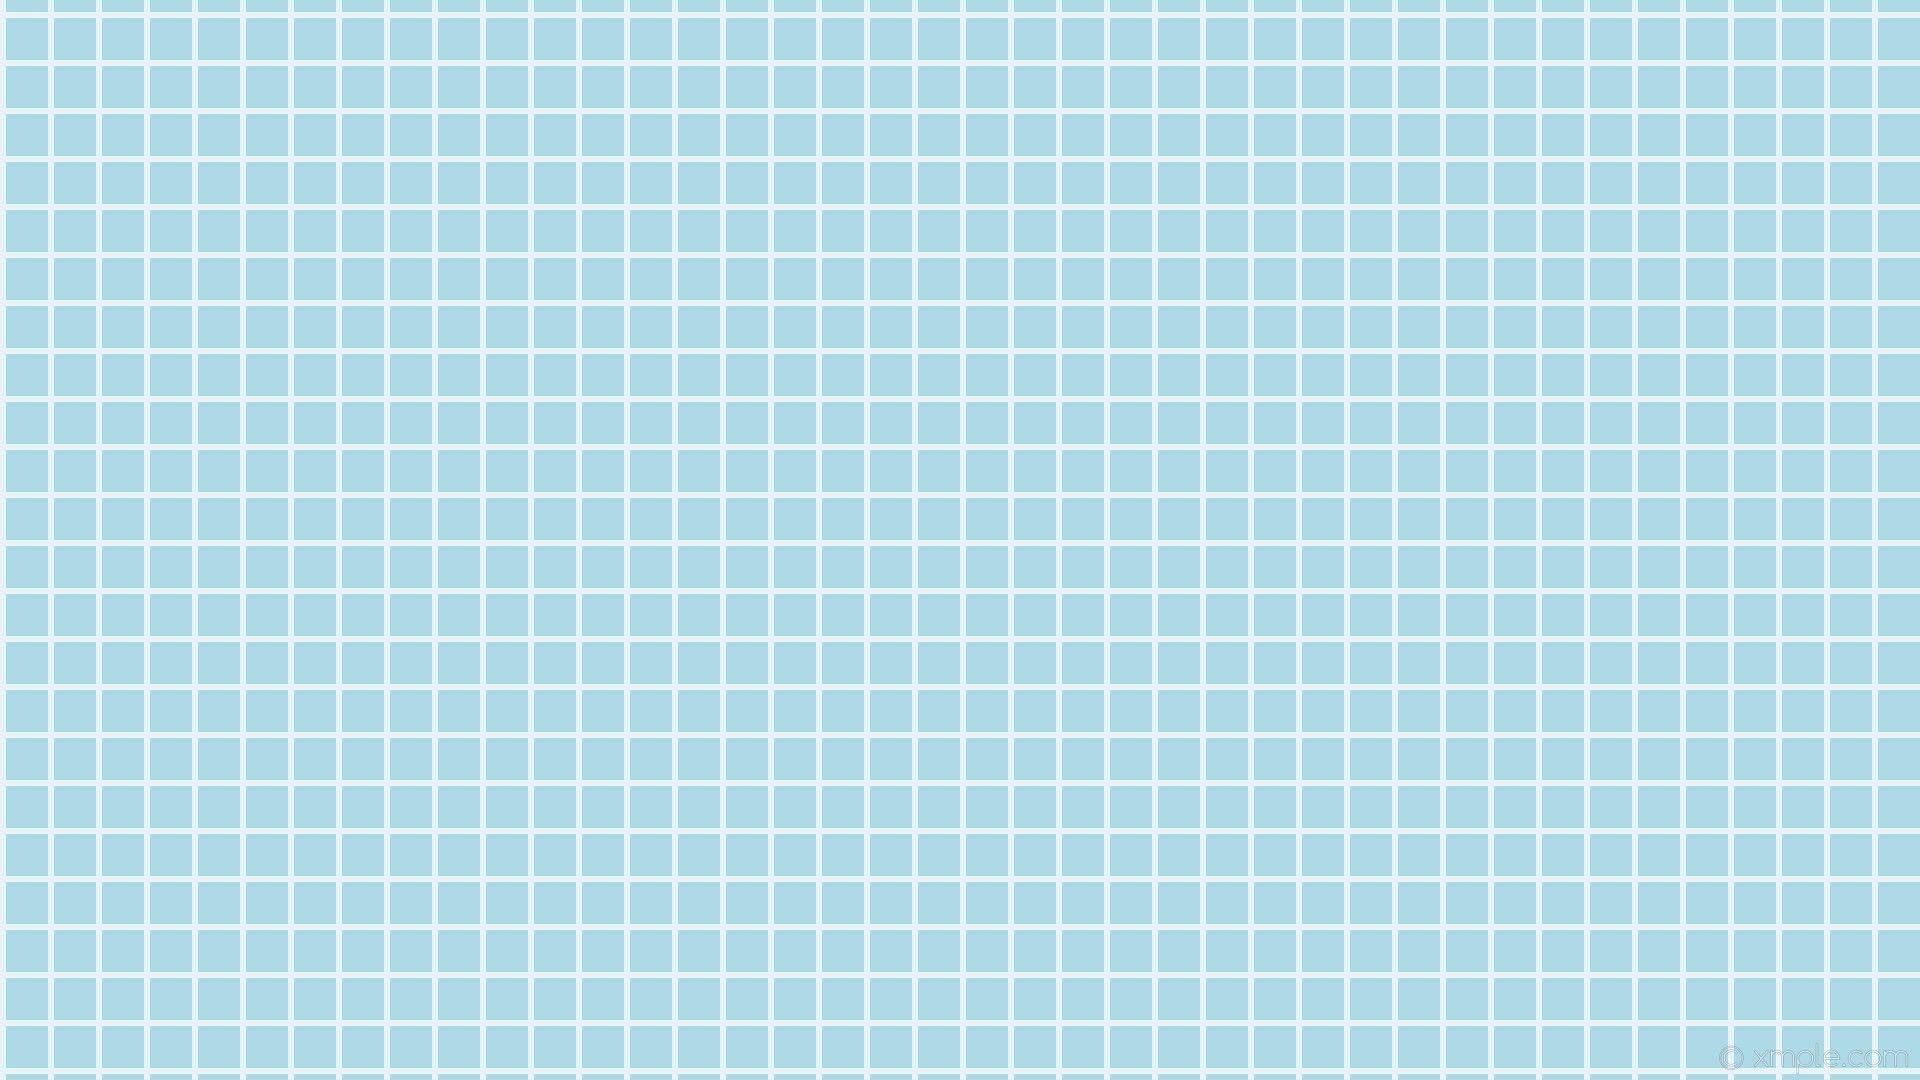 Blue Seamless Grid Images  Free Photos PNG Stickers Wallpapers   Backgrounds  rawpixel